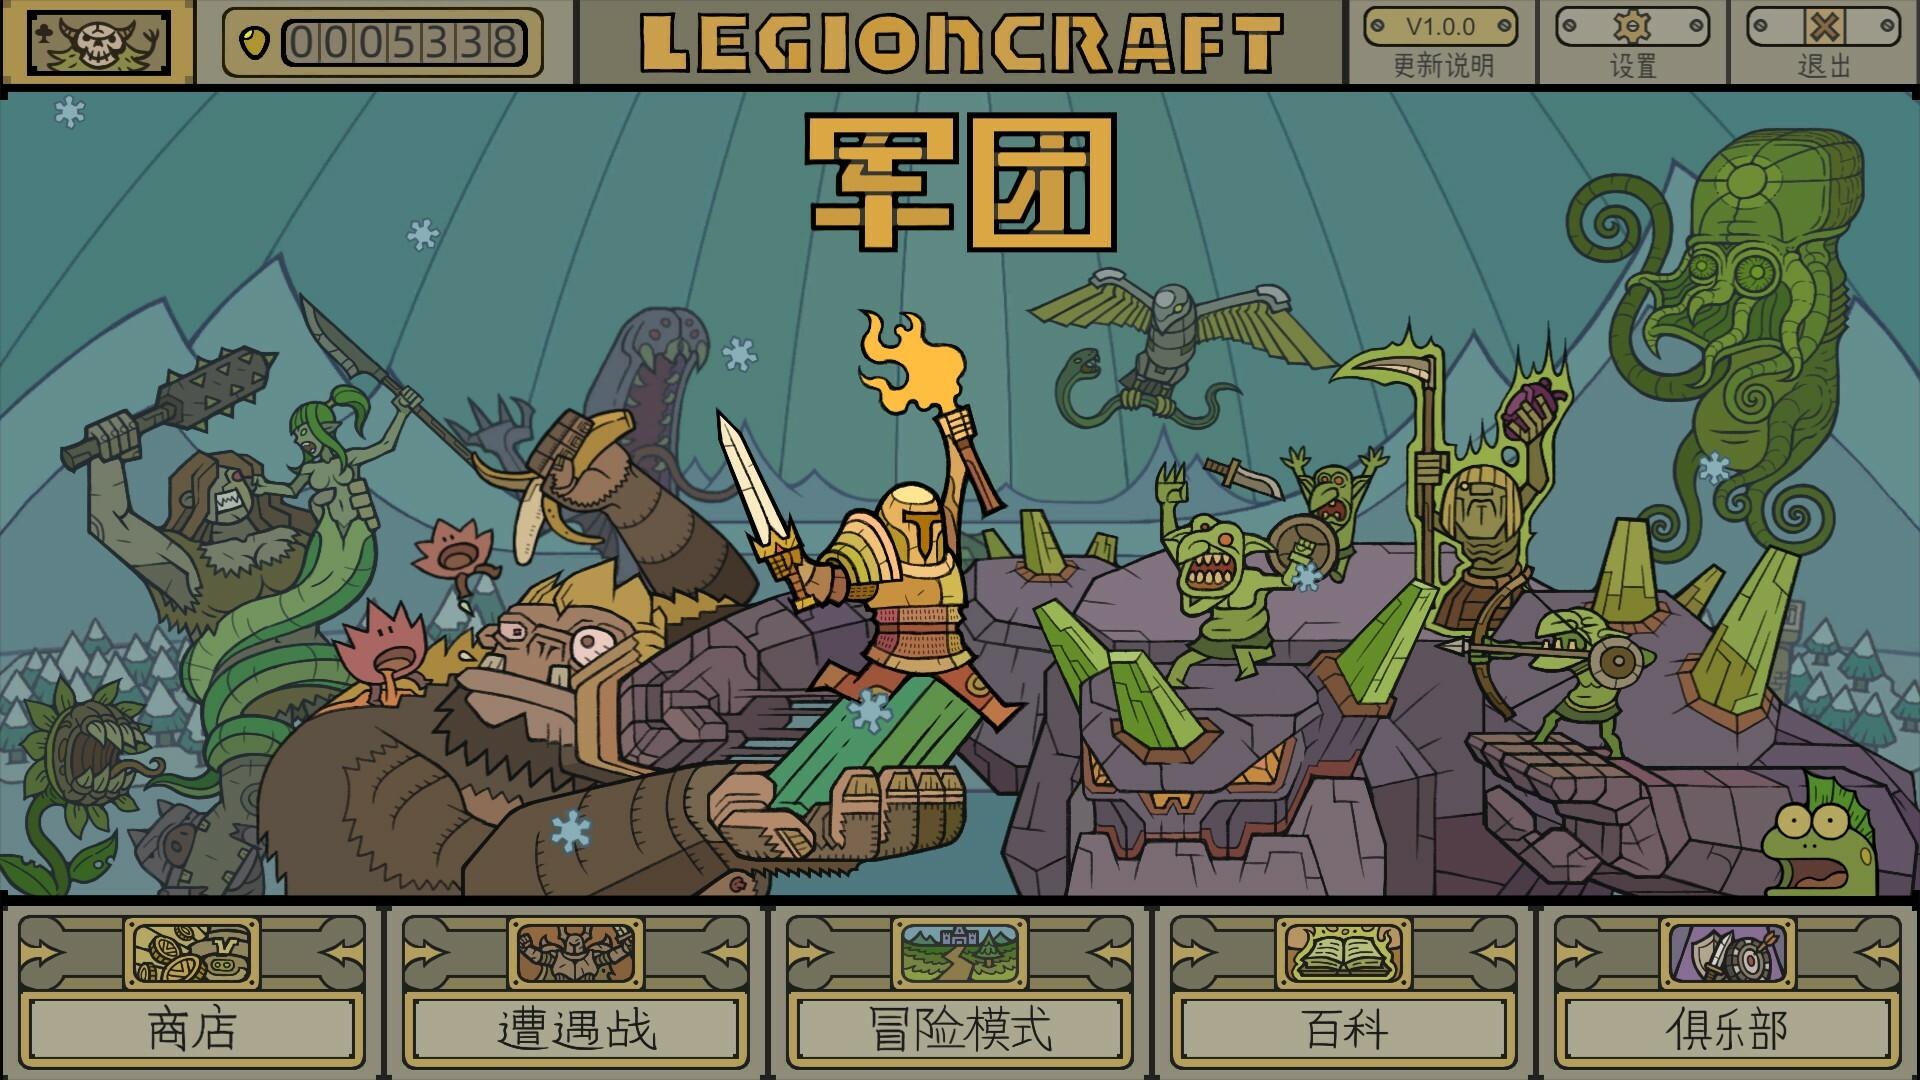 Screenshot №1 from game LEGIONCRAFT